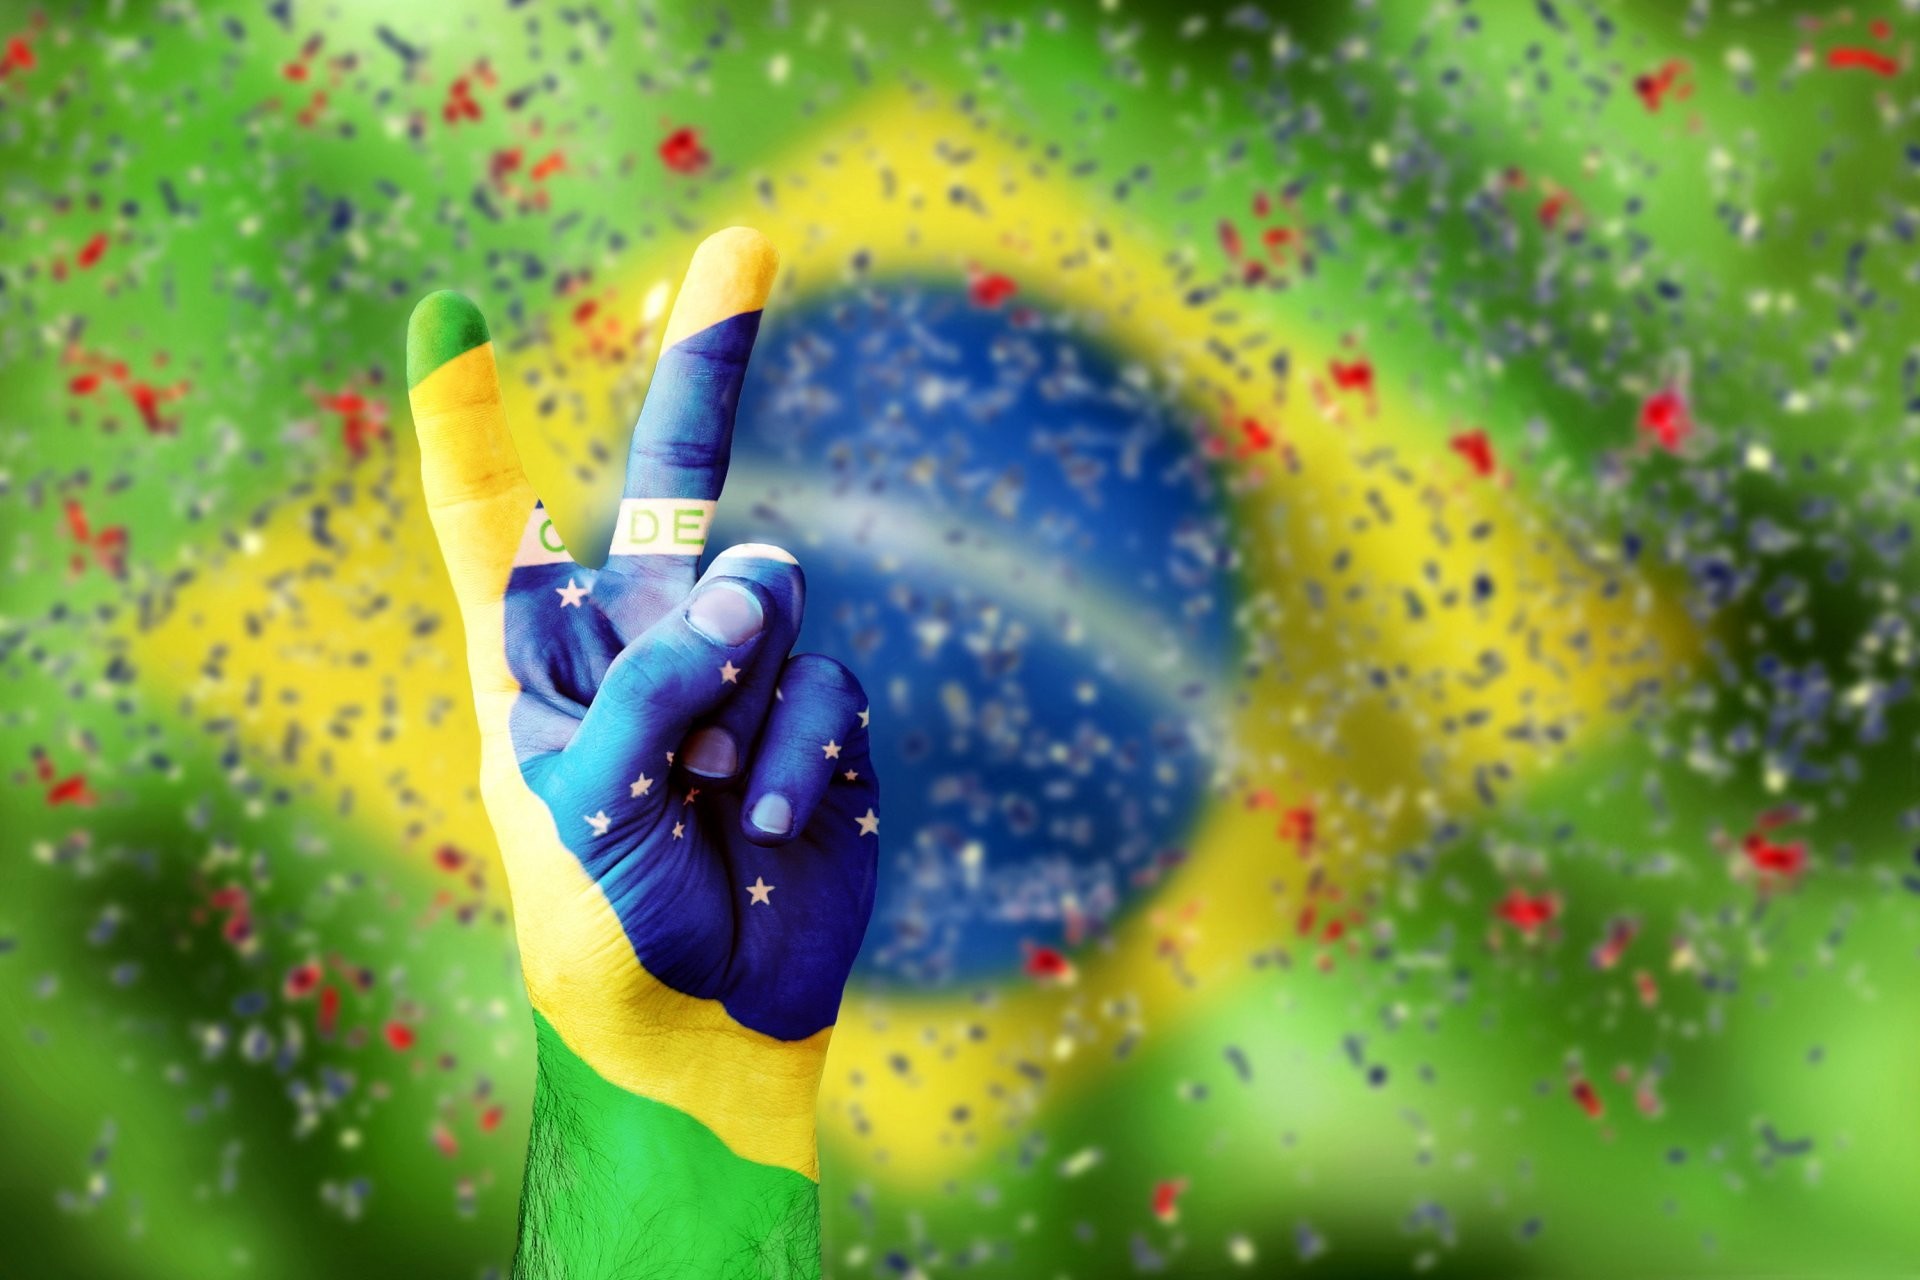 1920x1280 ... Brazil Wallpapers, Brazil Wallpapers Free Download - 33 Most .